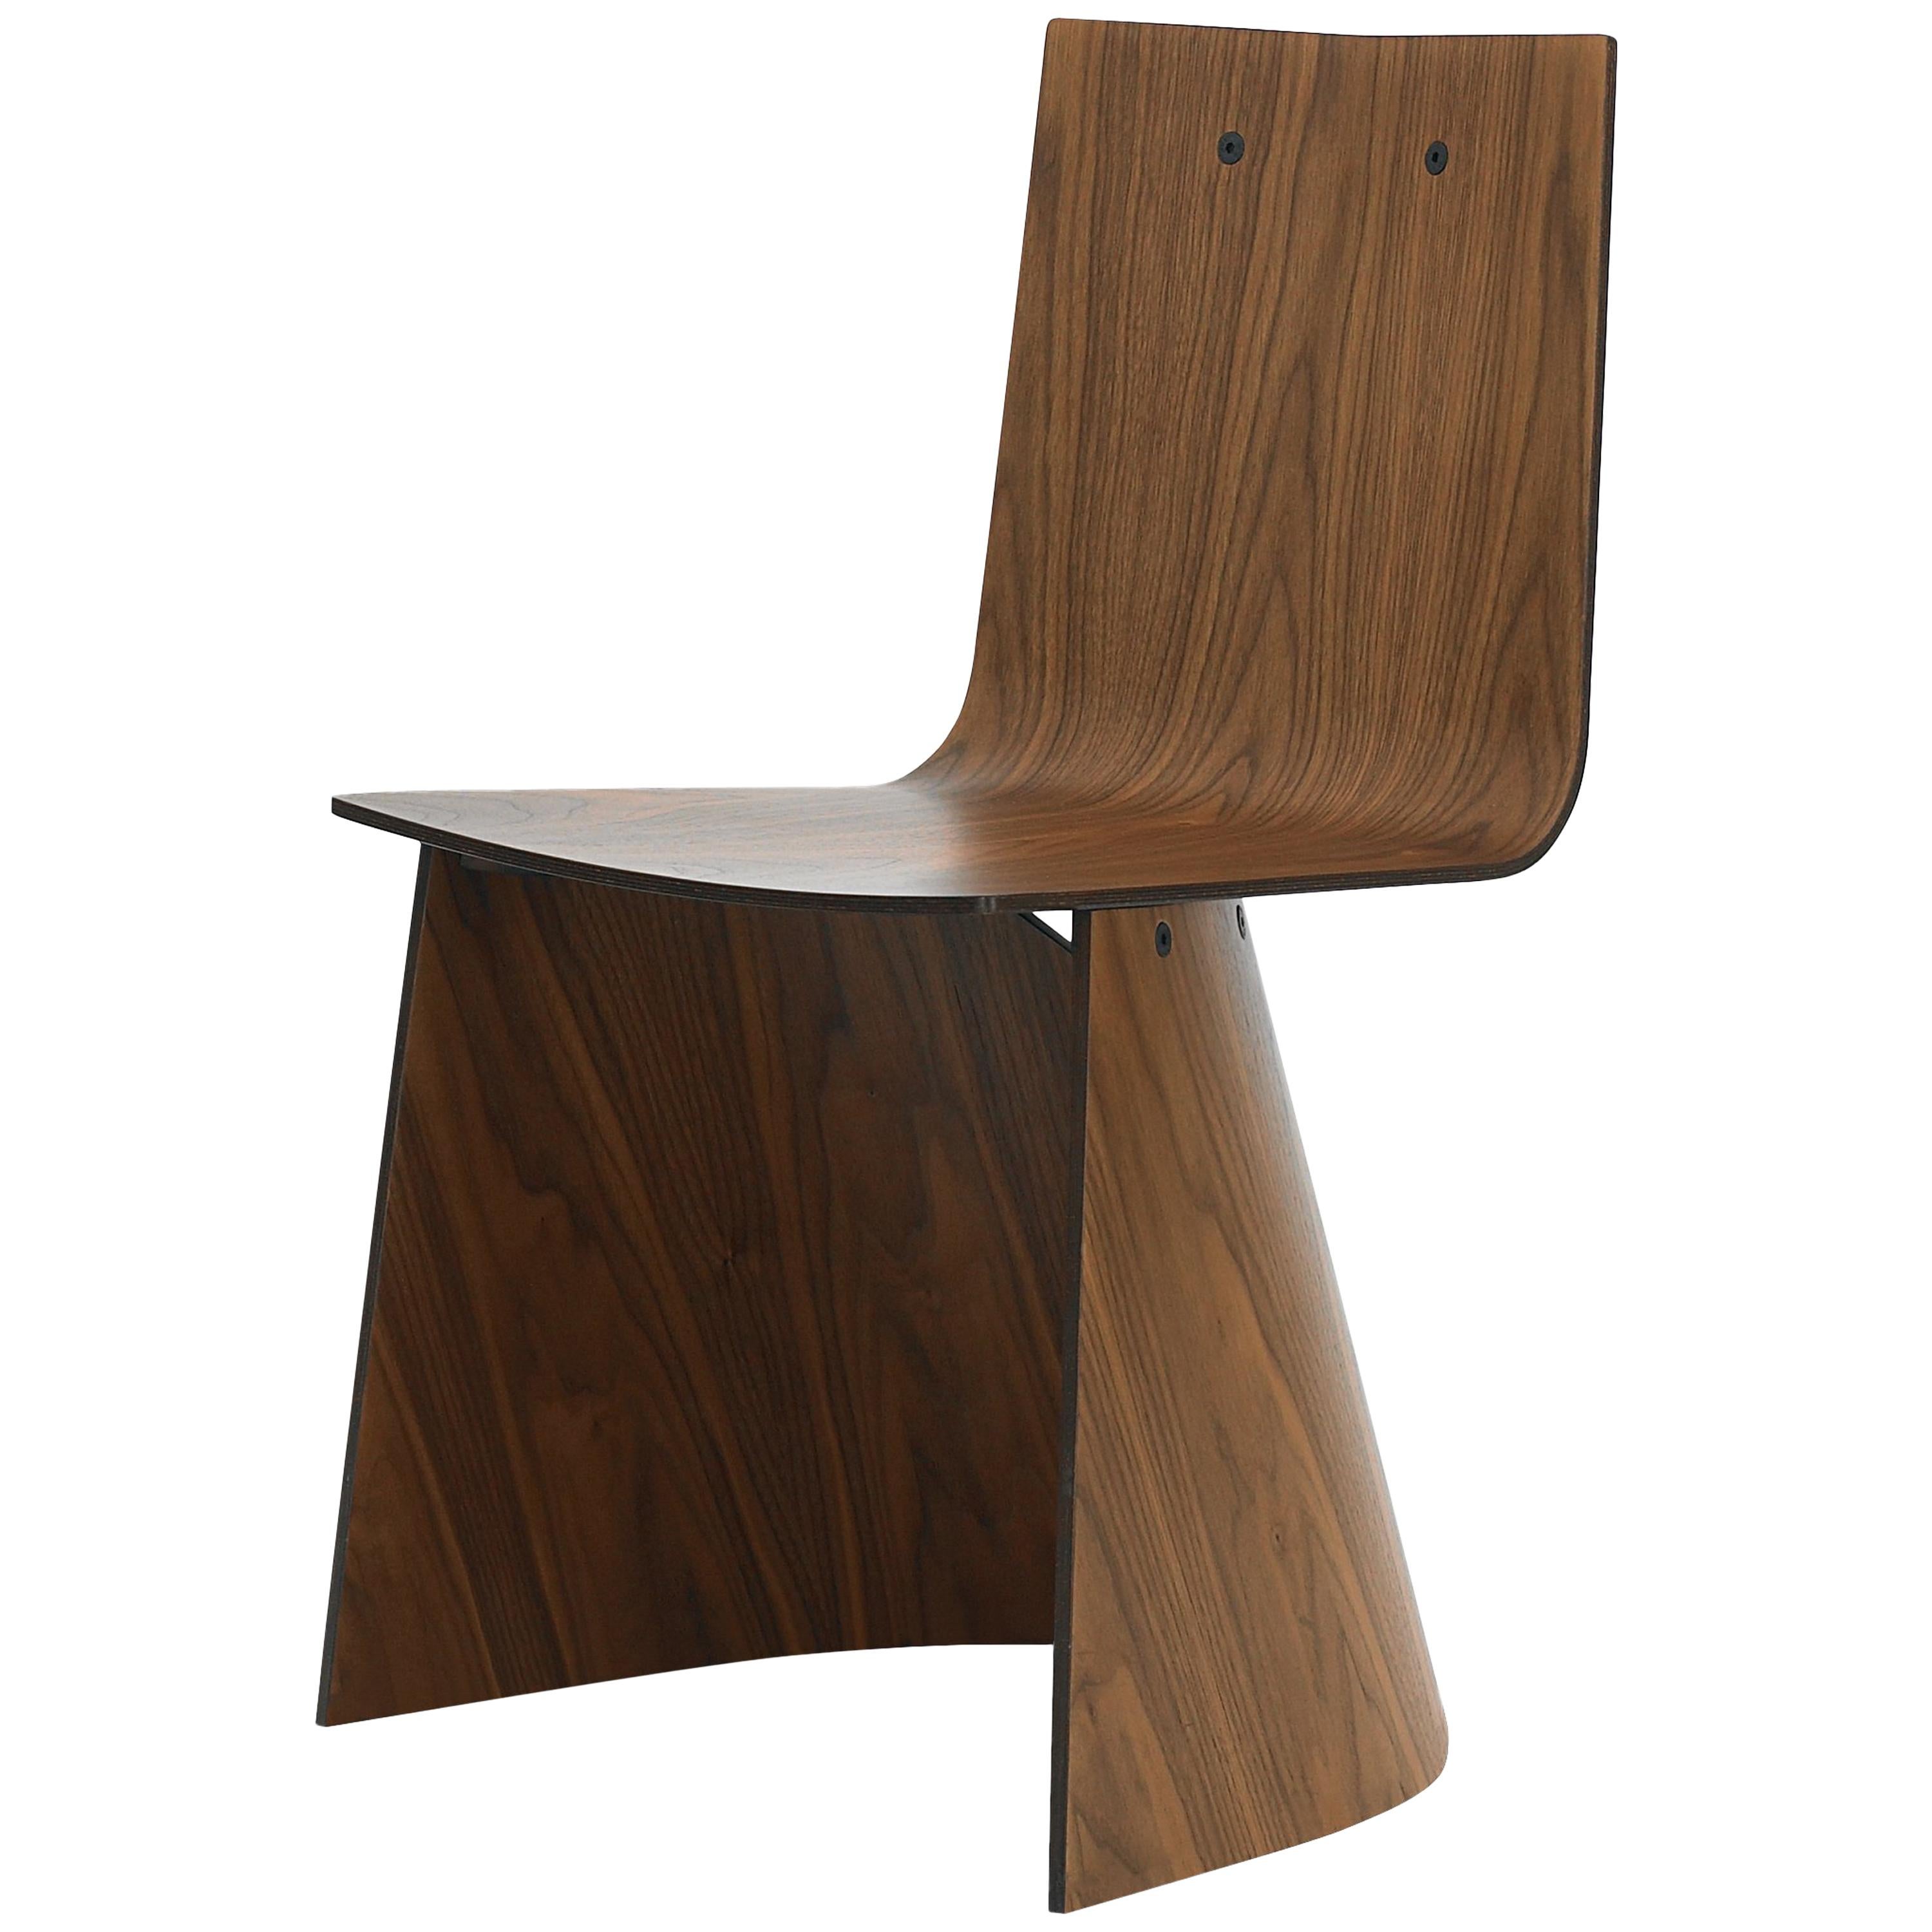 ClassiCon Venus Chair in Wood by Konstantin Grcic